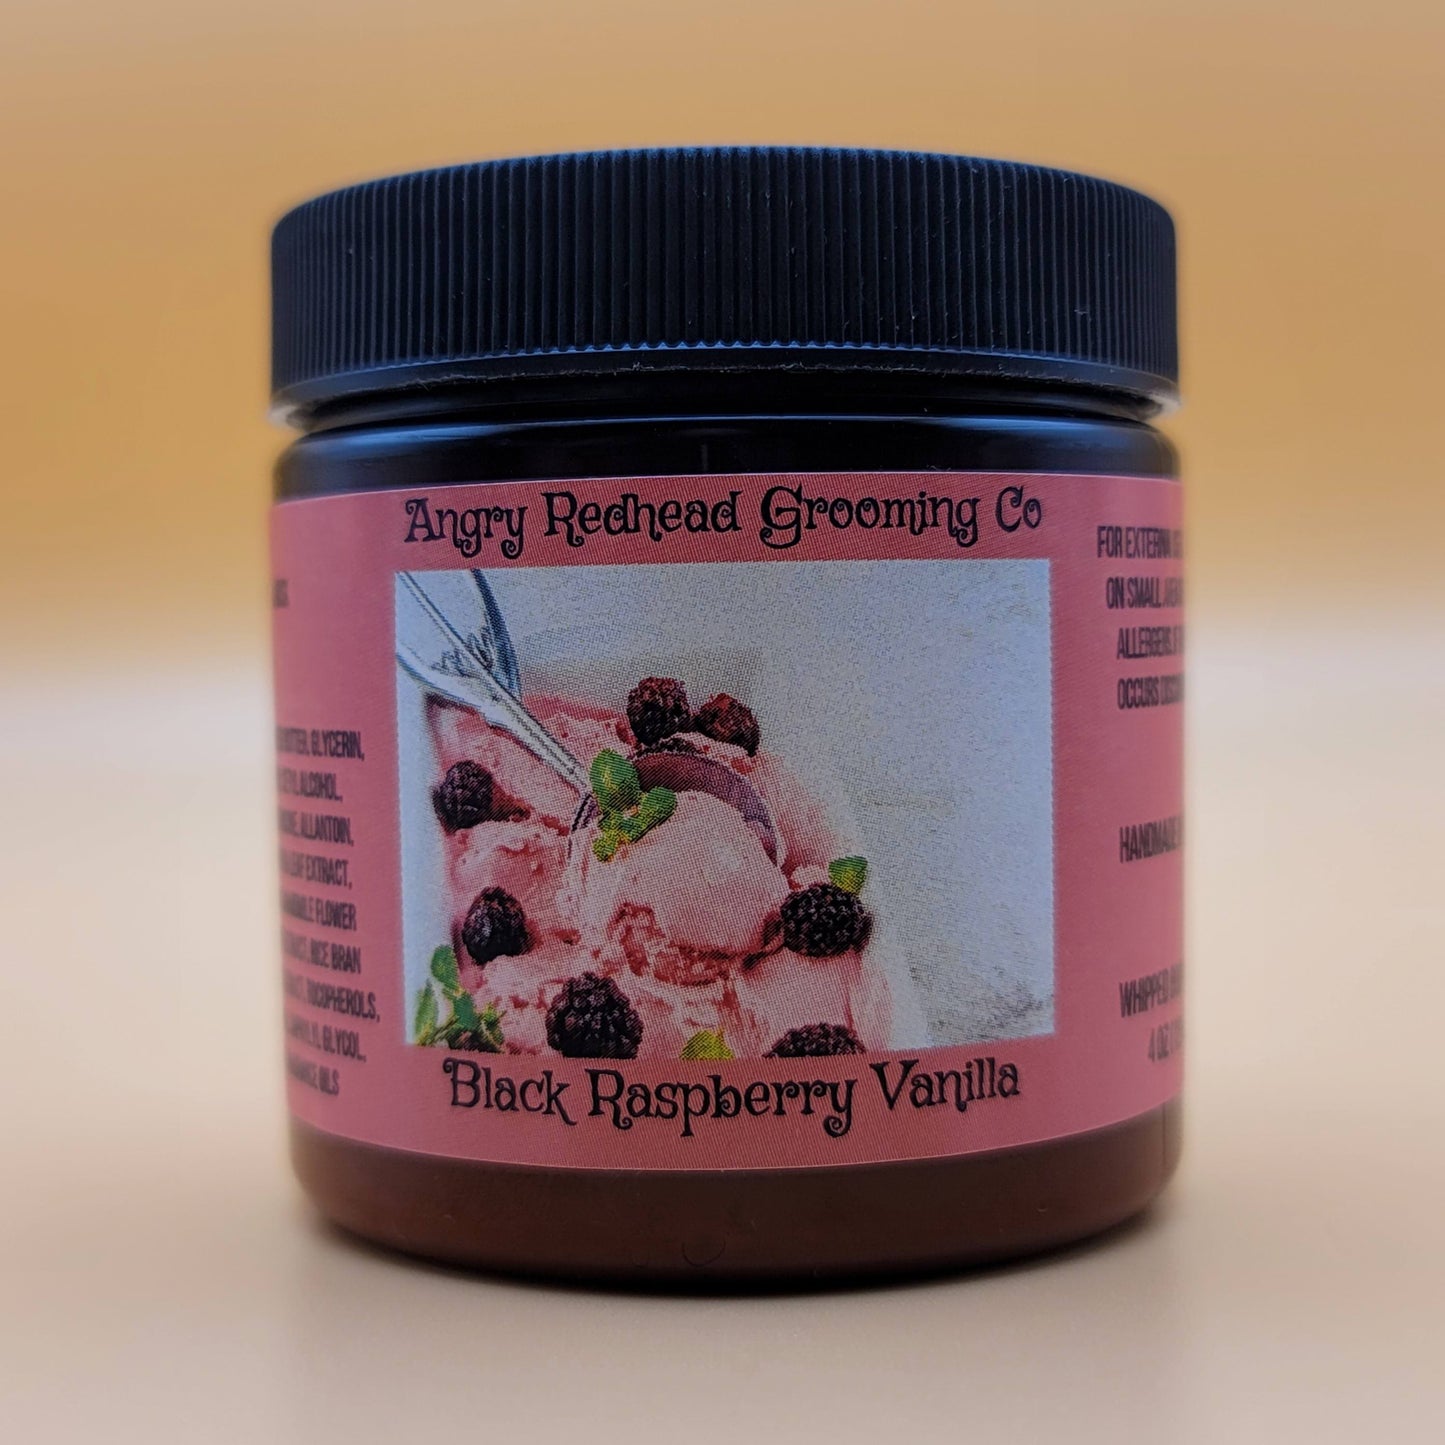 Black Raspberry Vanilla Whipped Body Butter by Angry Redhead Grooming Co - angryredheadgrooming.com